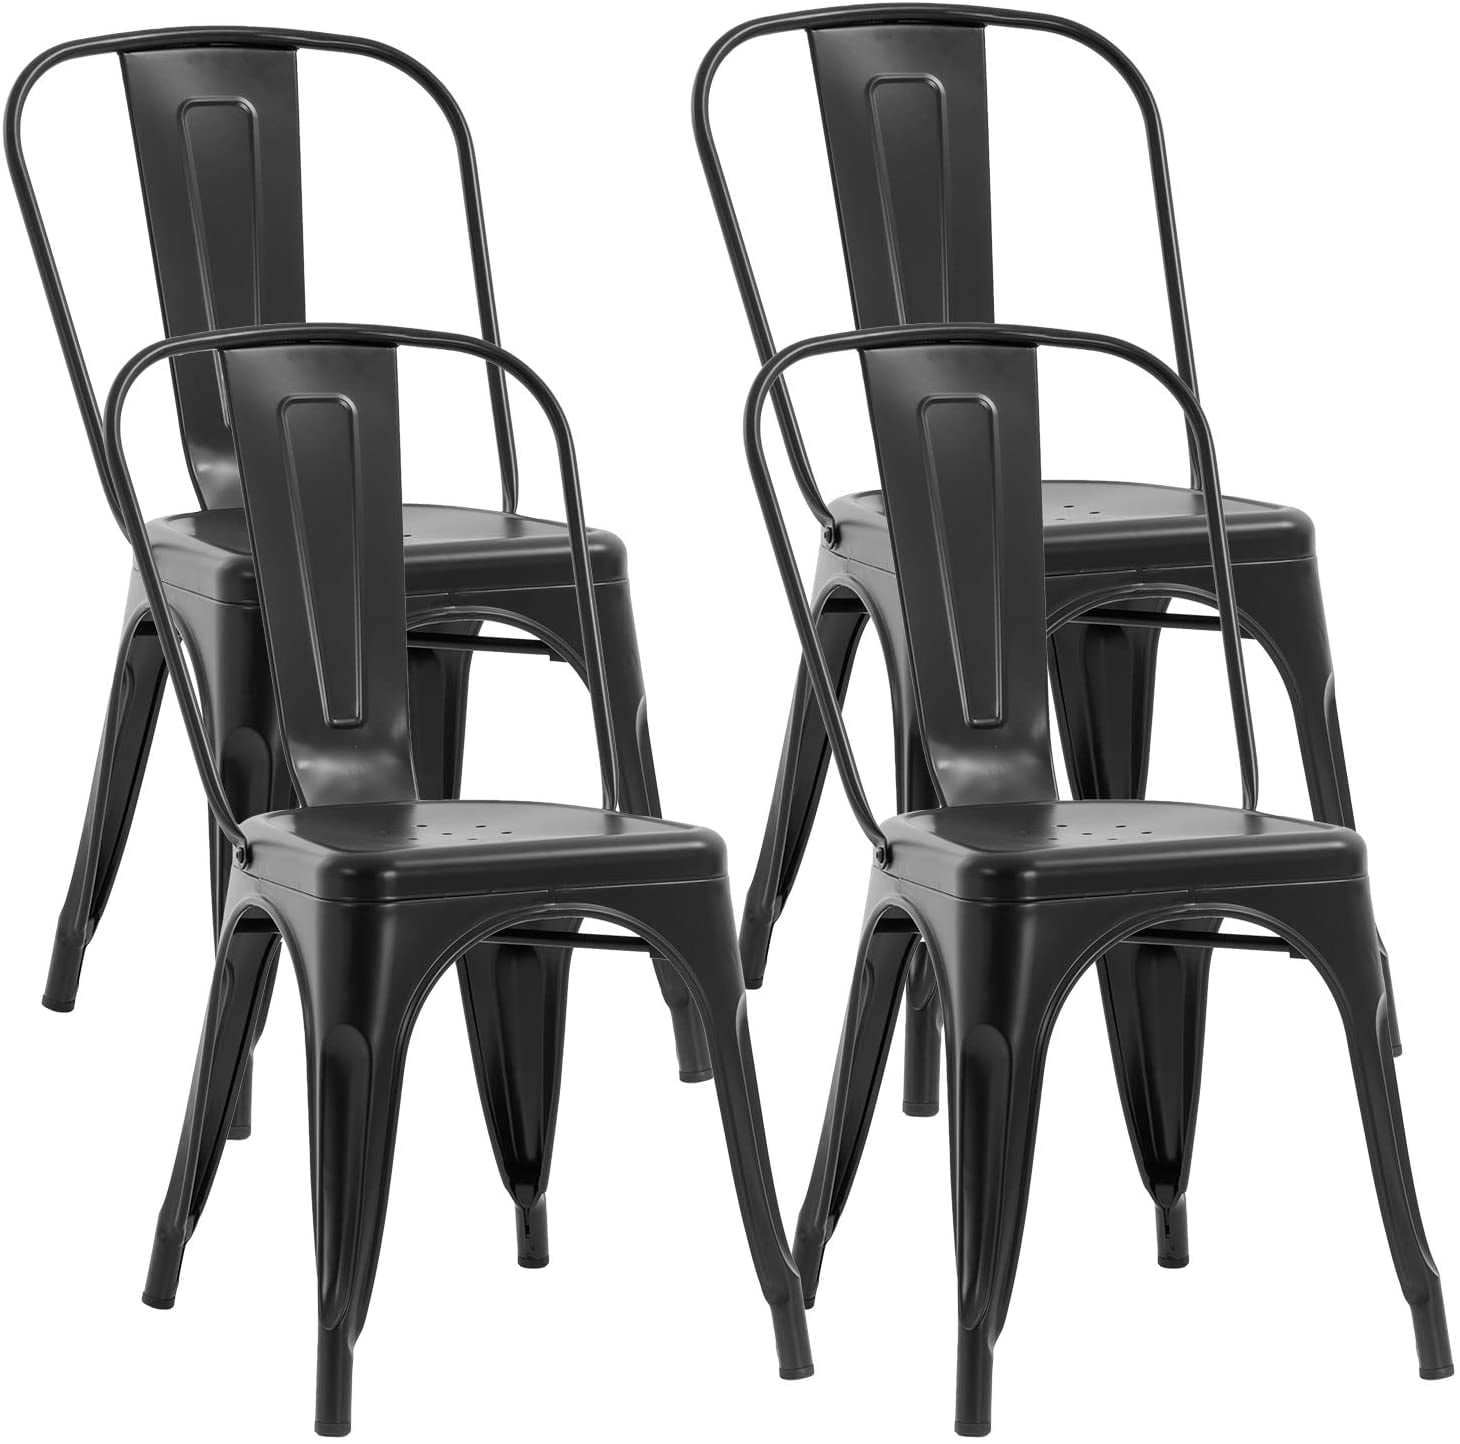 Metal Chair Dining Chairs Set of 4 Patio Chair 18 Inches Seat Height